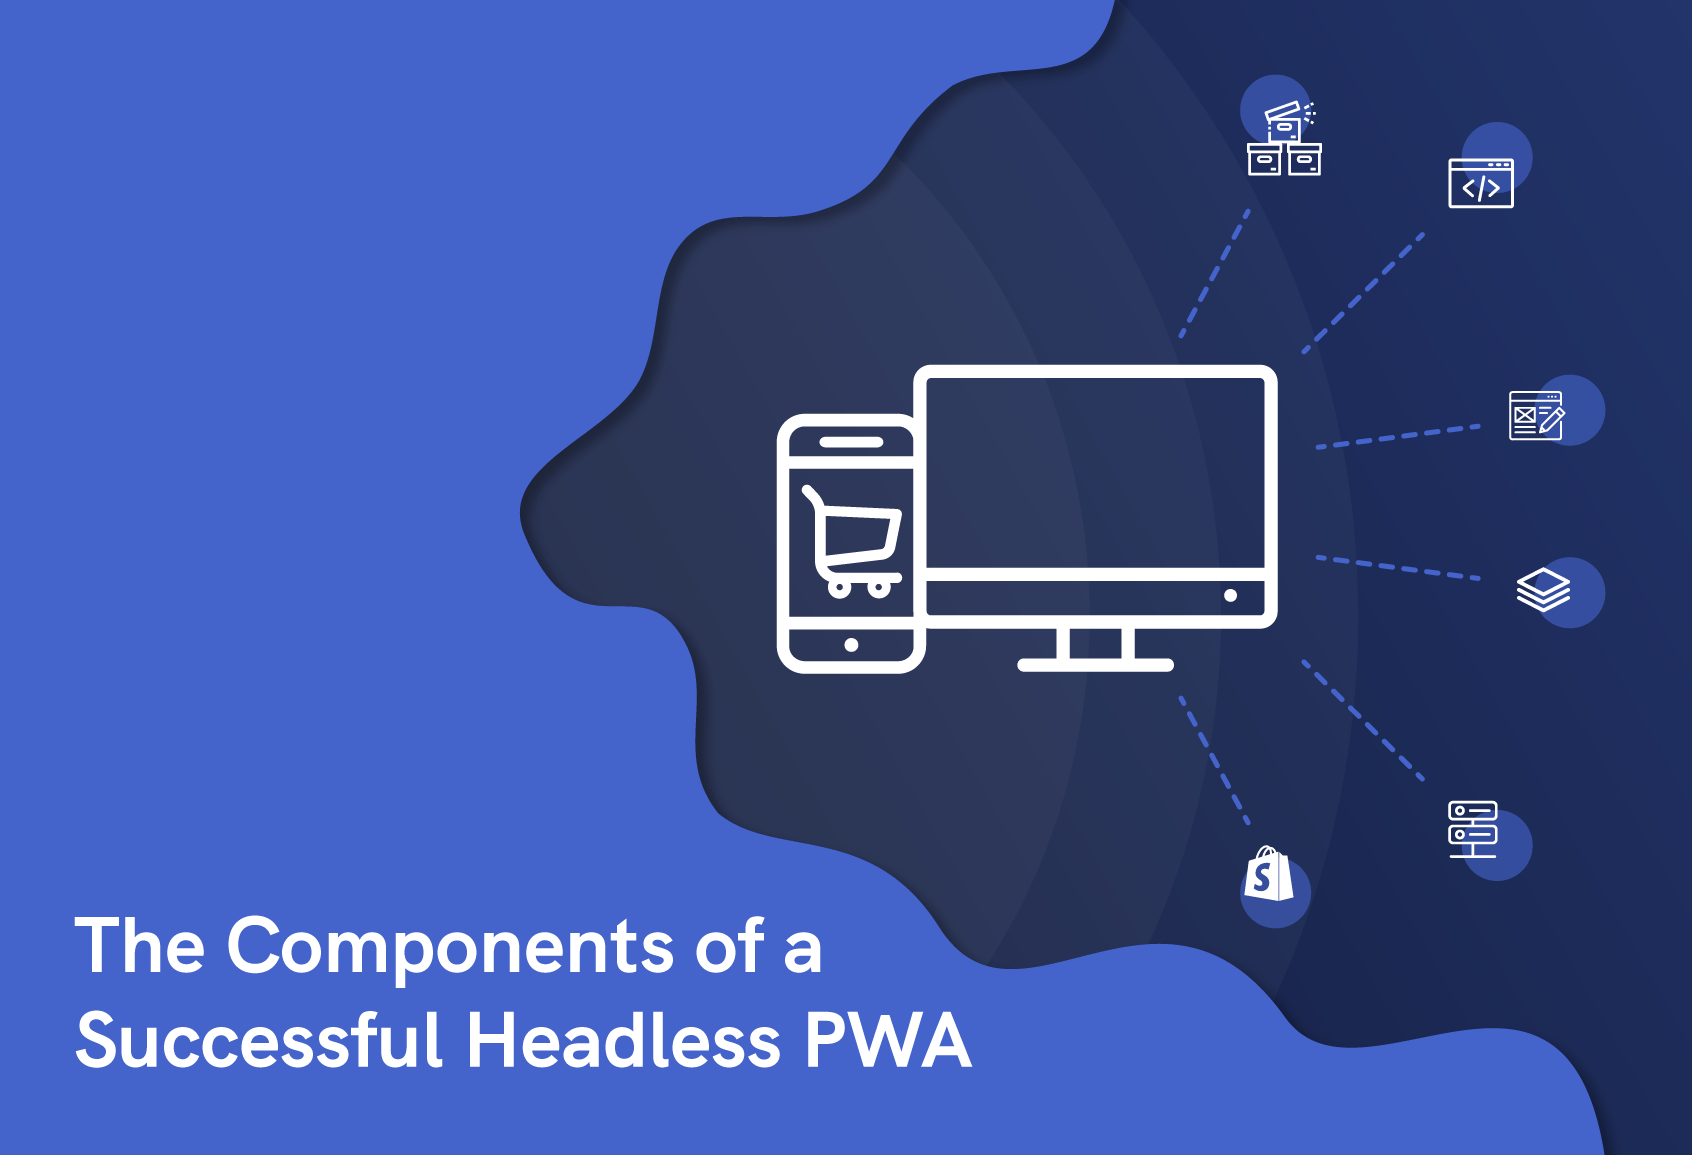  The components of a successful headless PWA 